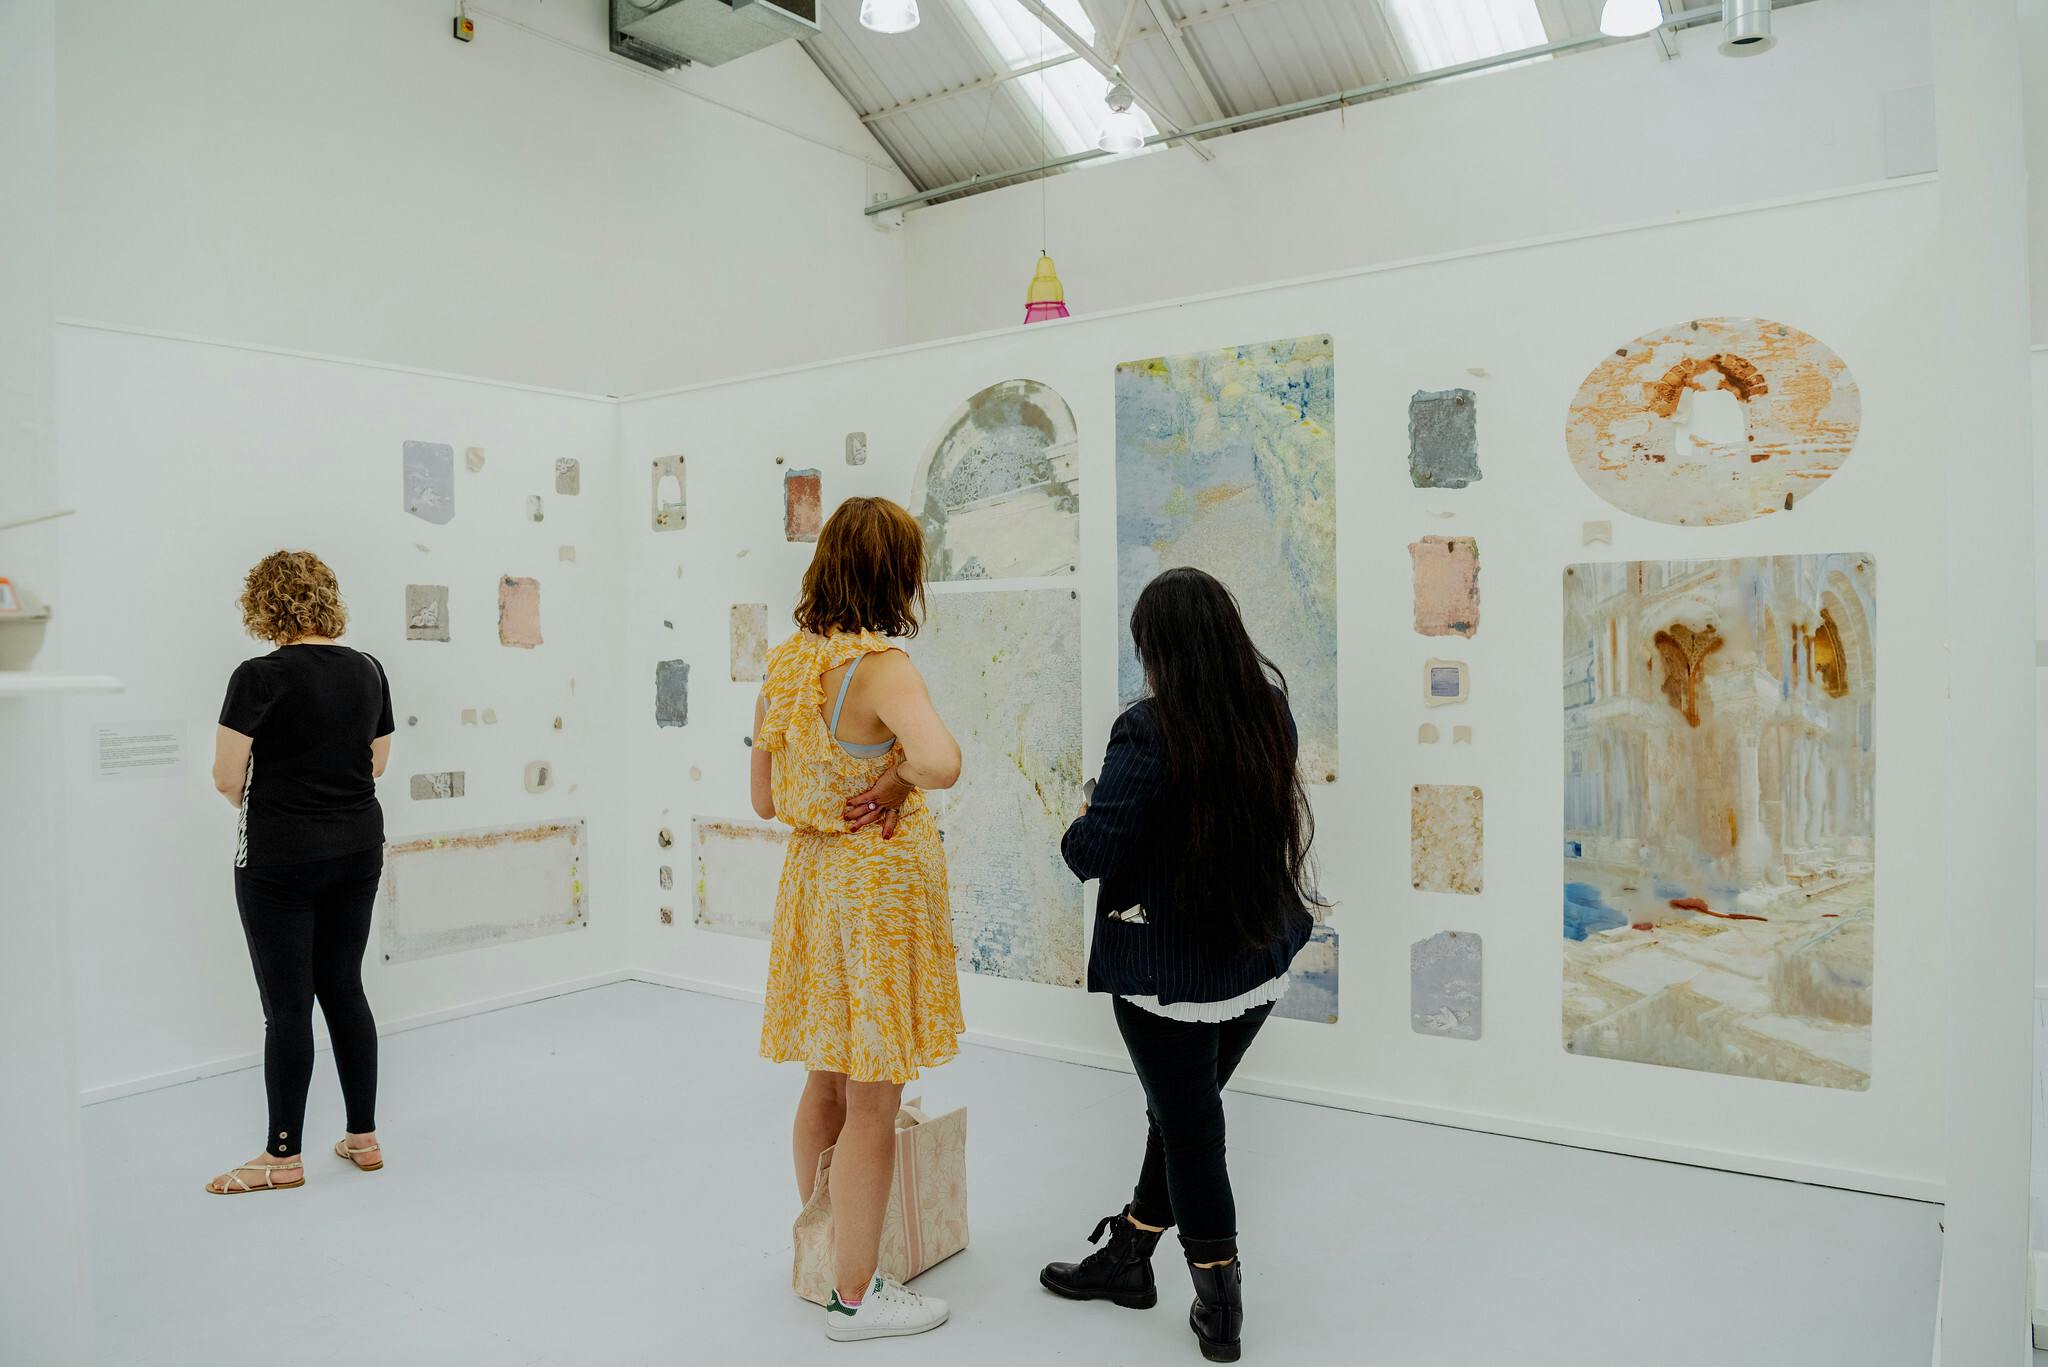 People stand in a light filled gallery with white walls and pastel hued artwork on the walls